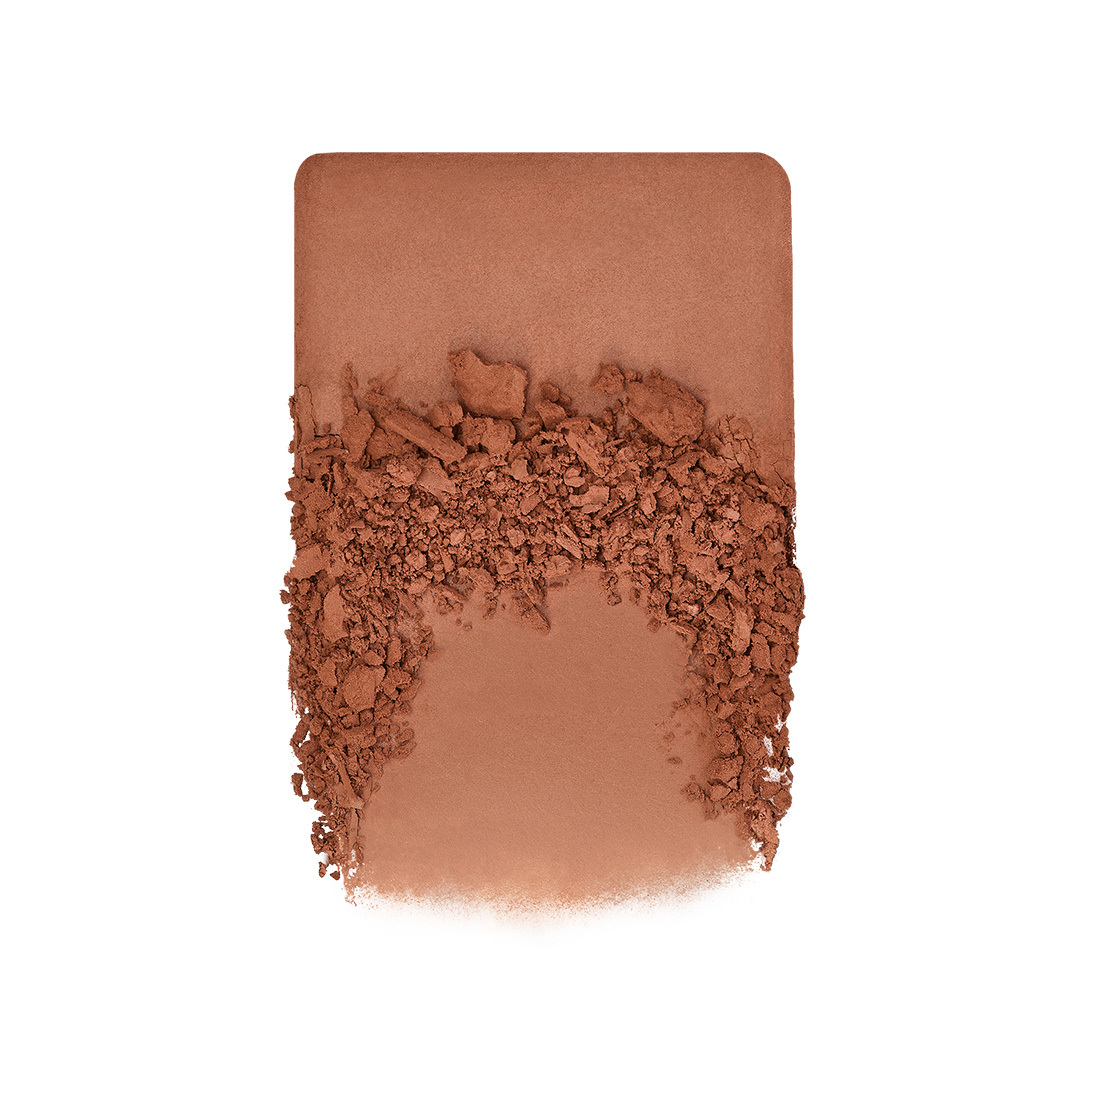 Make Up For Ever Artist Face Powders Sculpt 5G 440 Powerful Mocha  